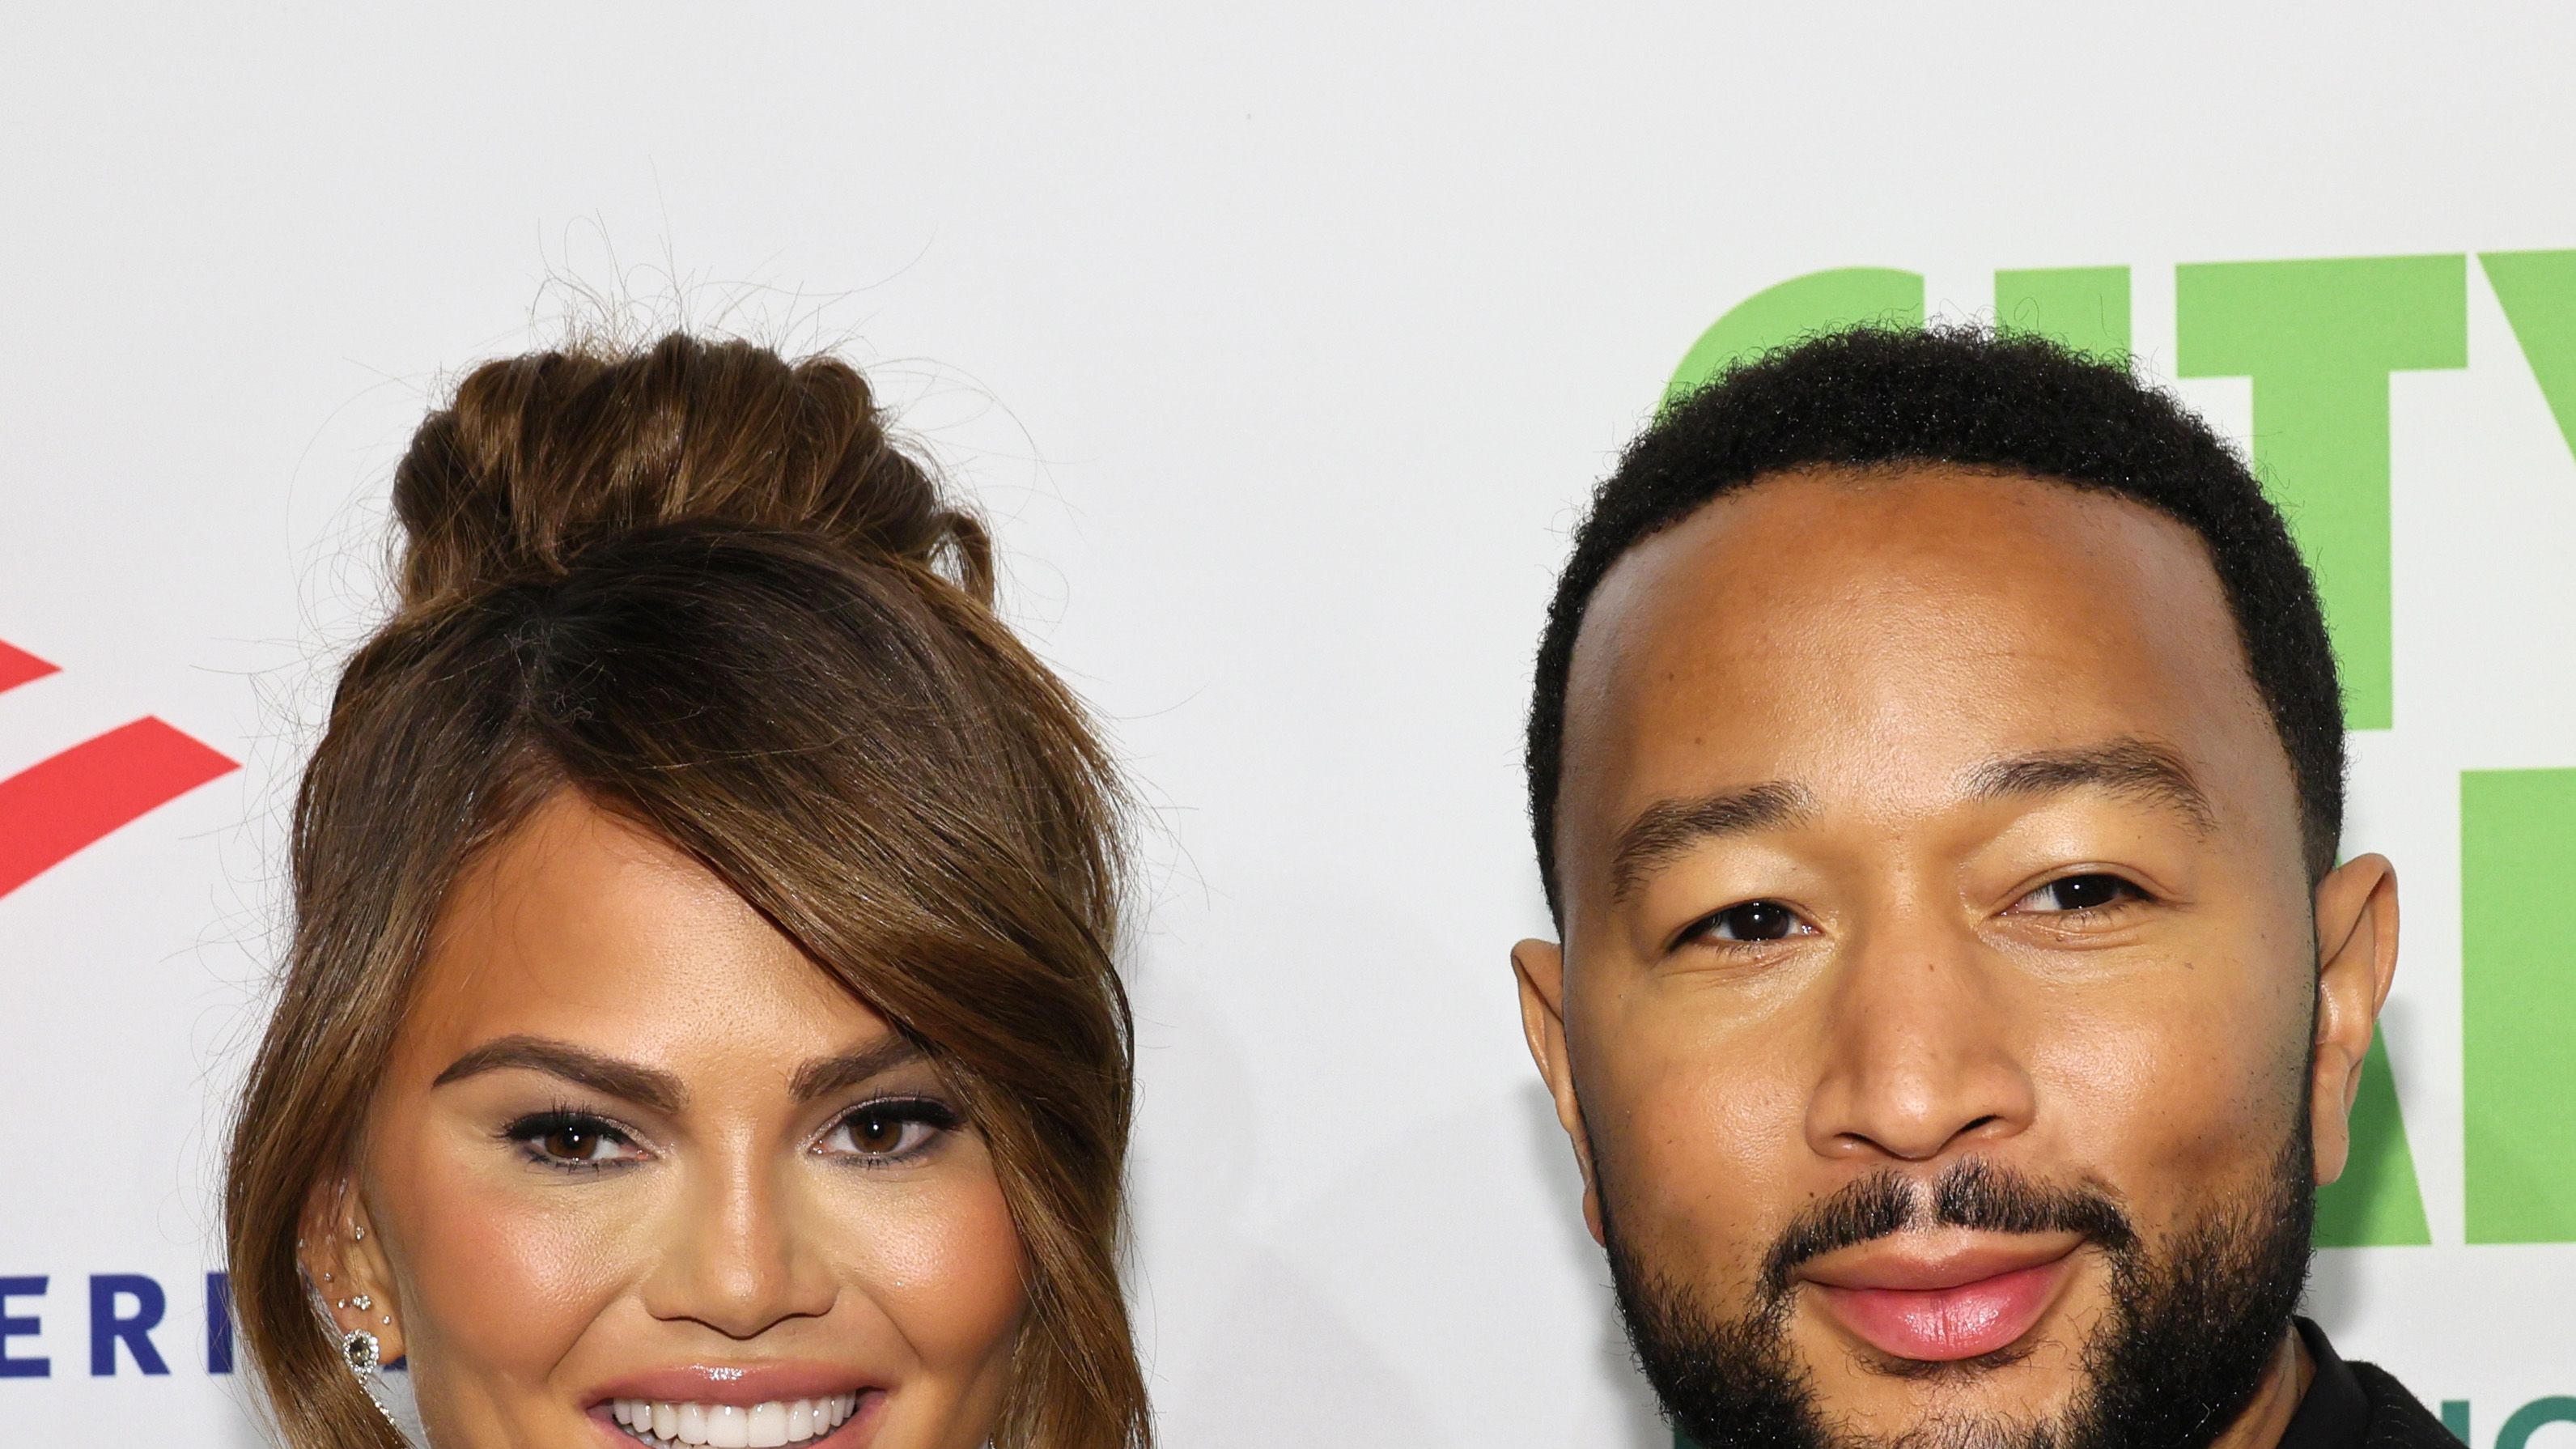 All About Chrissy Teigen's New Baby Via Surrogate And Kids